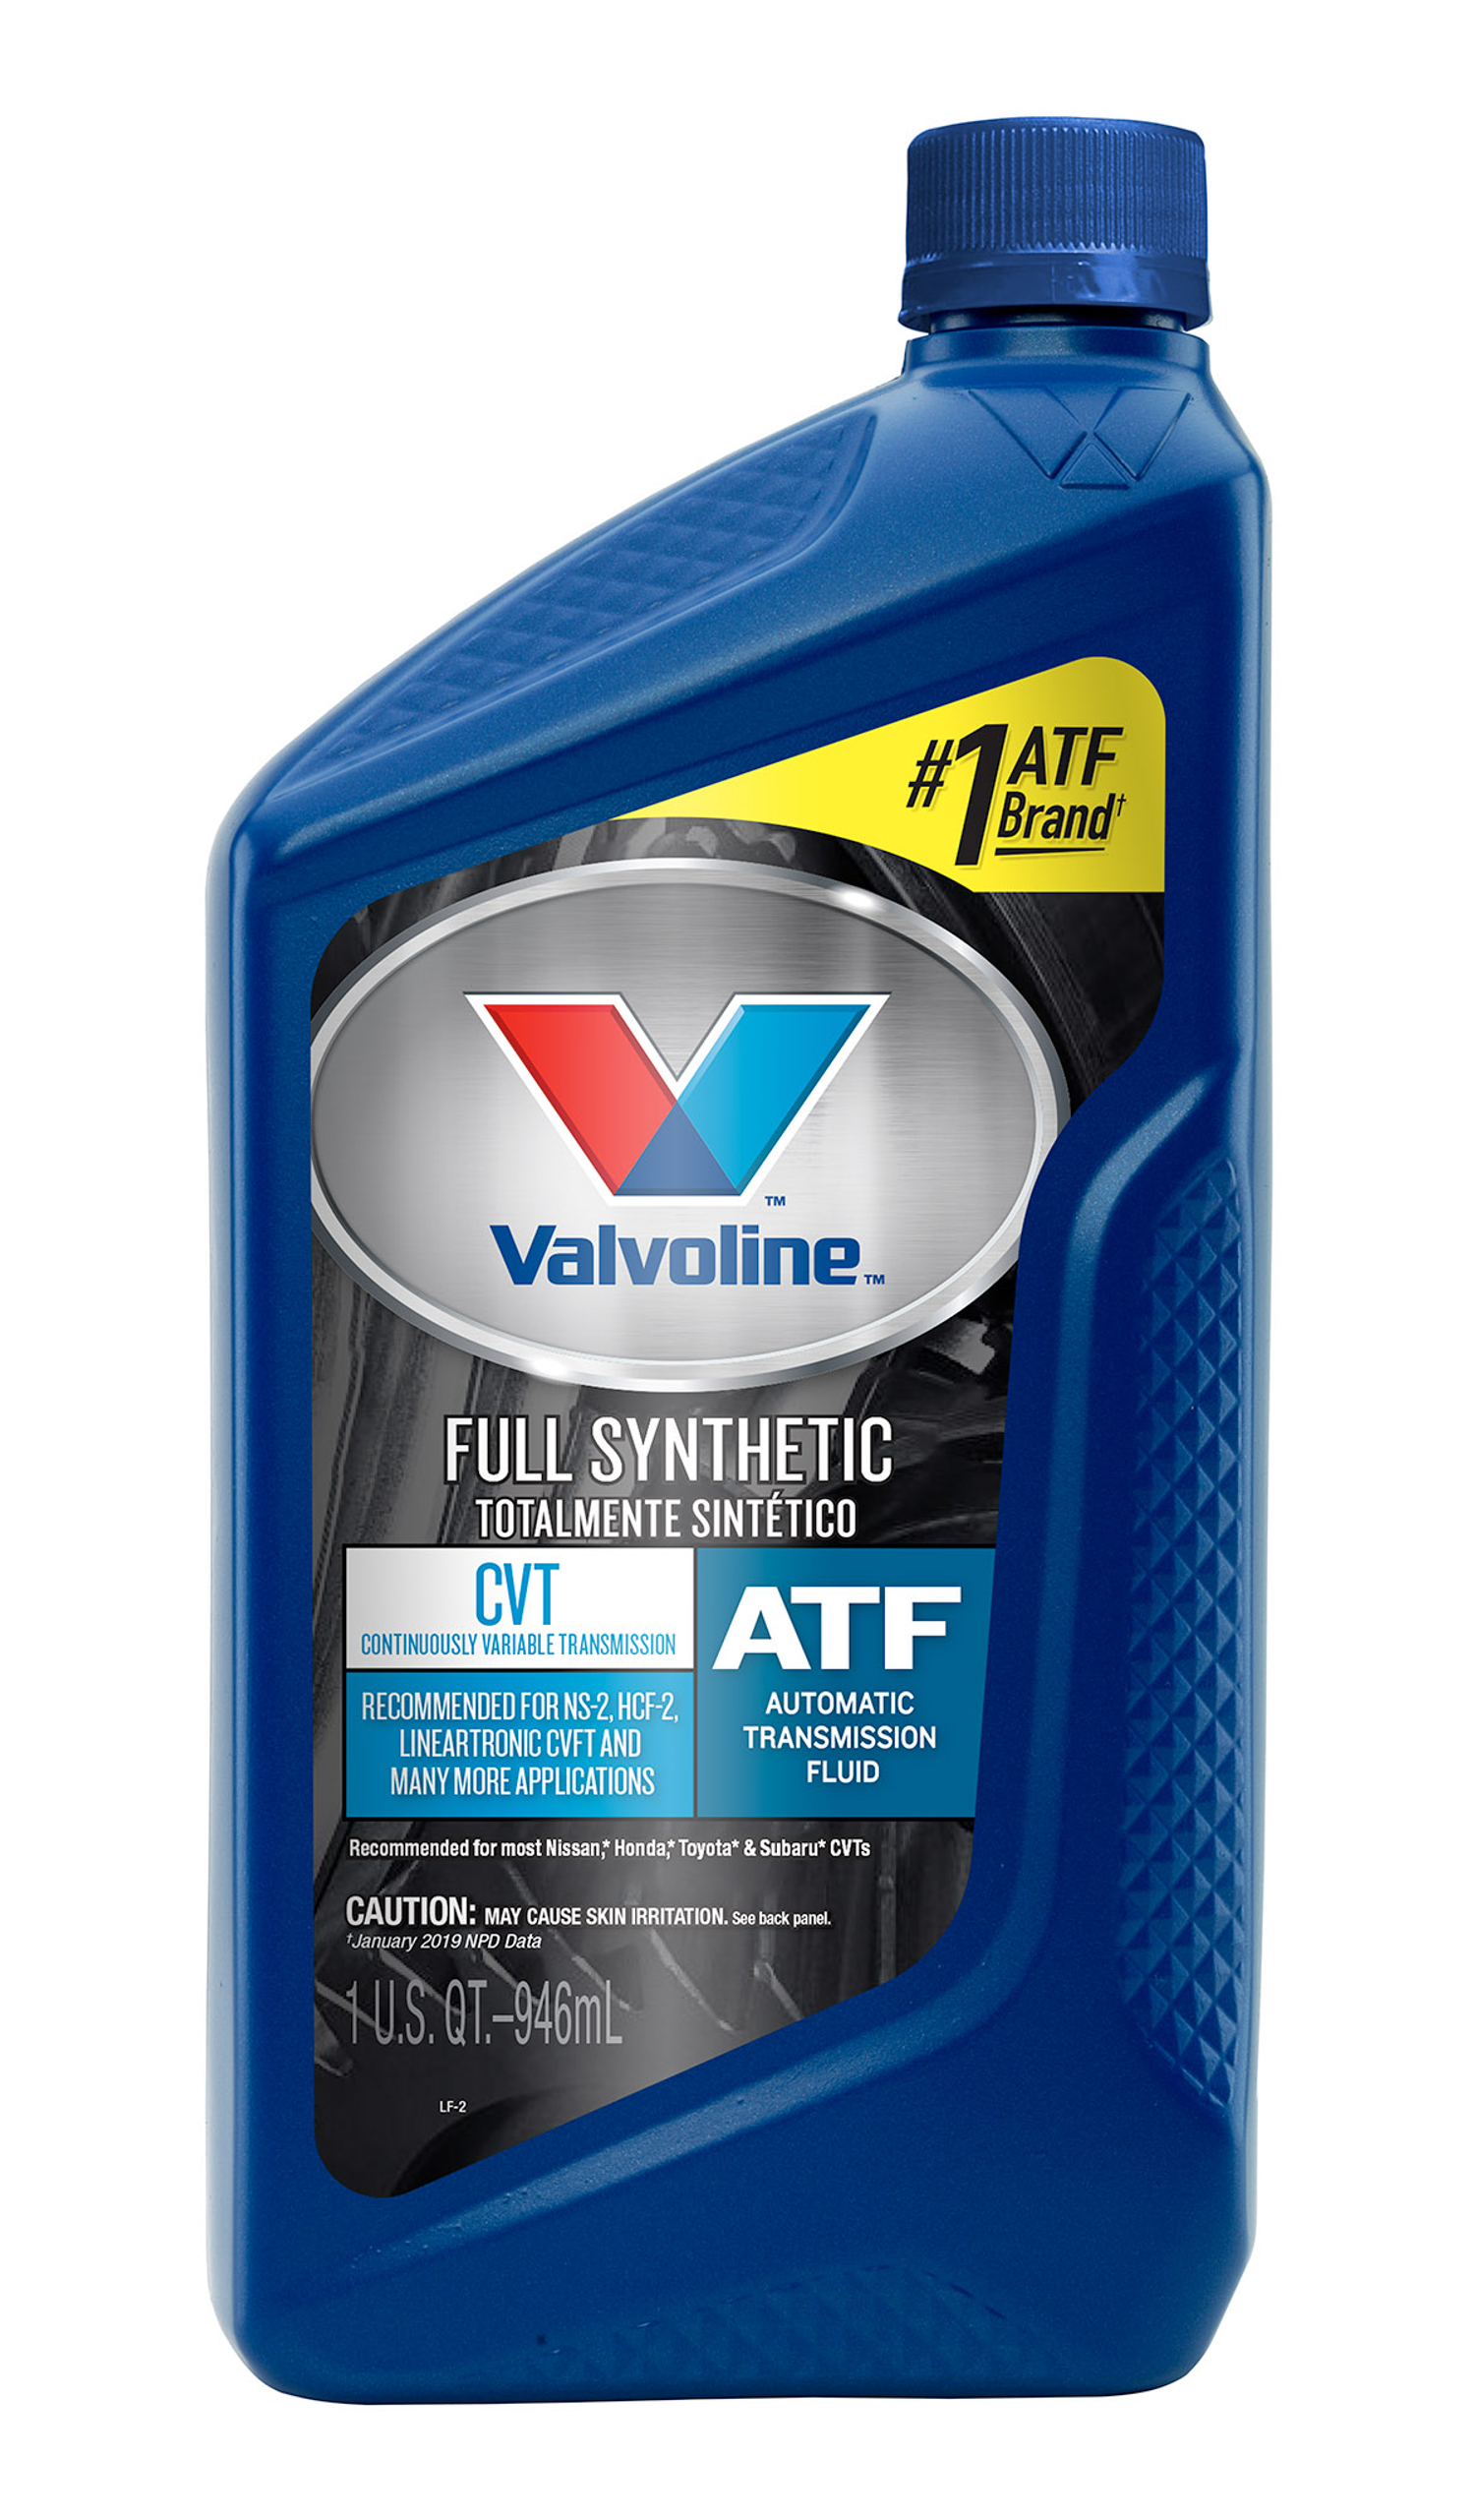 Valvoline Continuously Variable Transmission Fluid